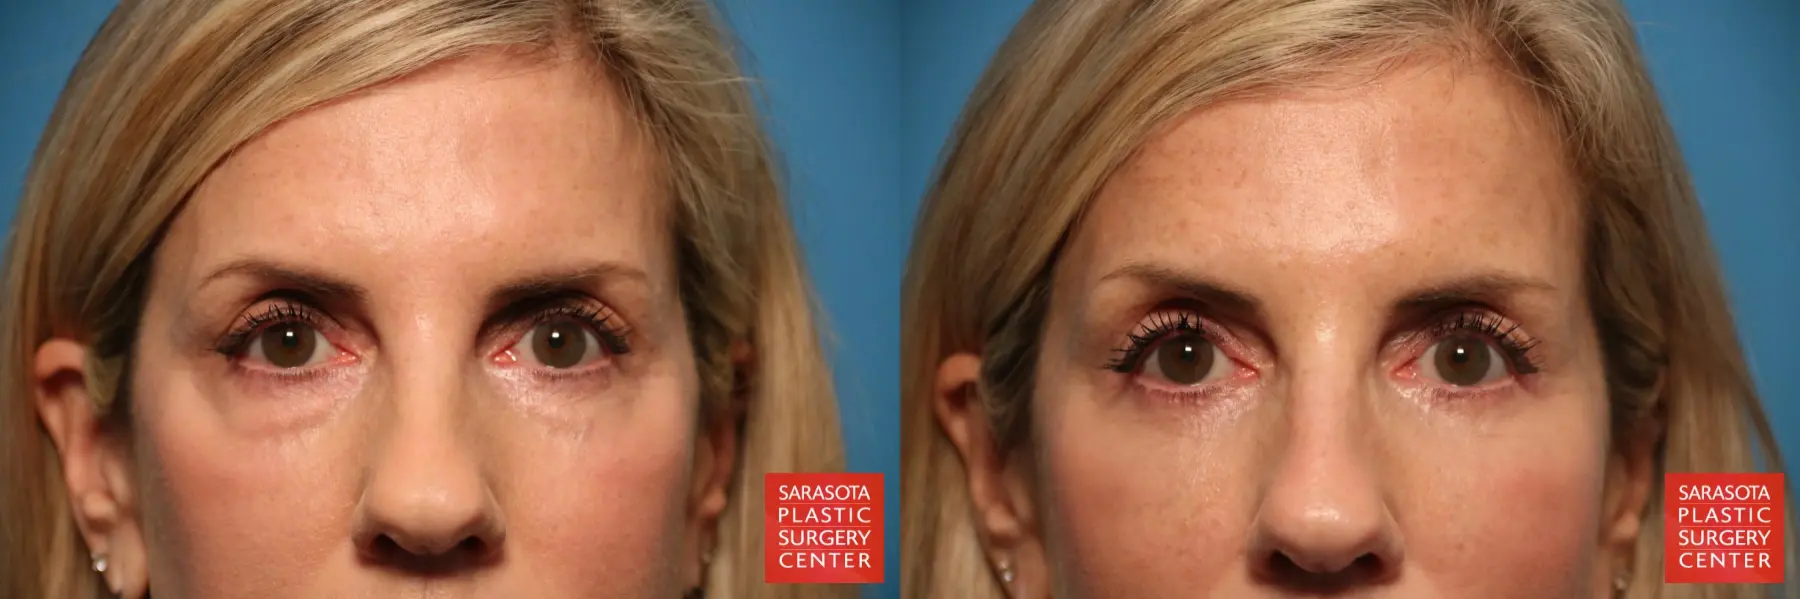 Eyelid Surgery: Patient 10 - Before and After 1